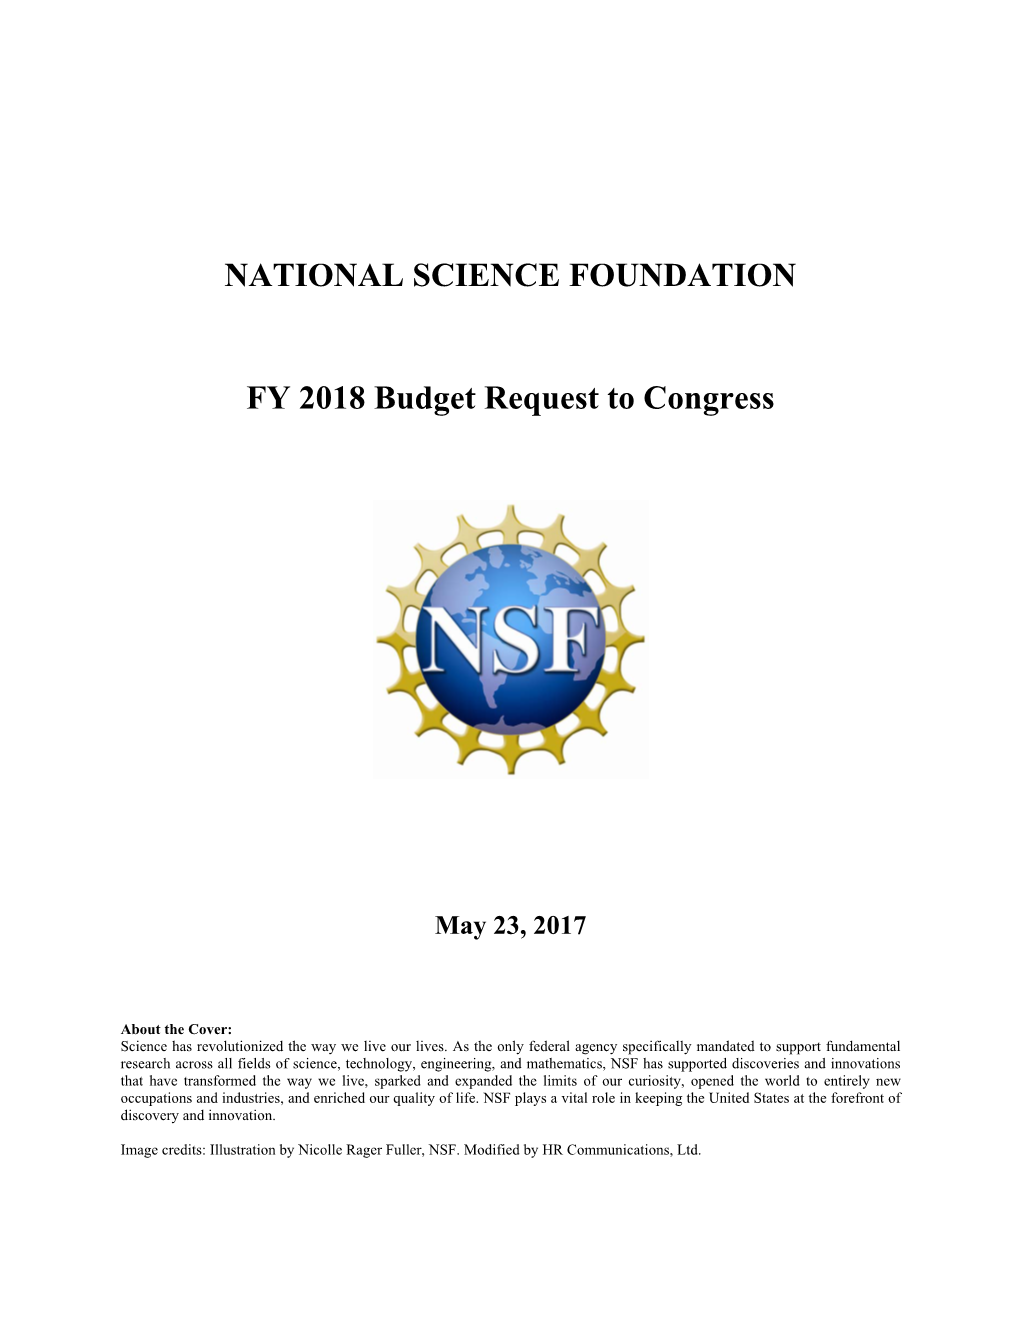 NATIONAL SCIENCE FOUNDATION FY 2018 Budget Request to Congress